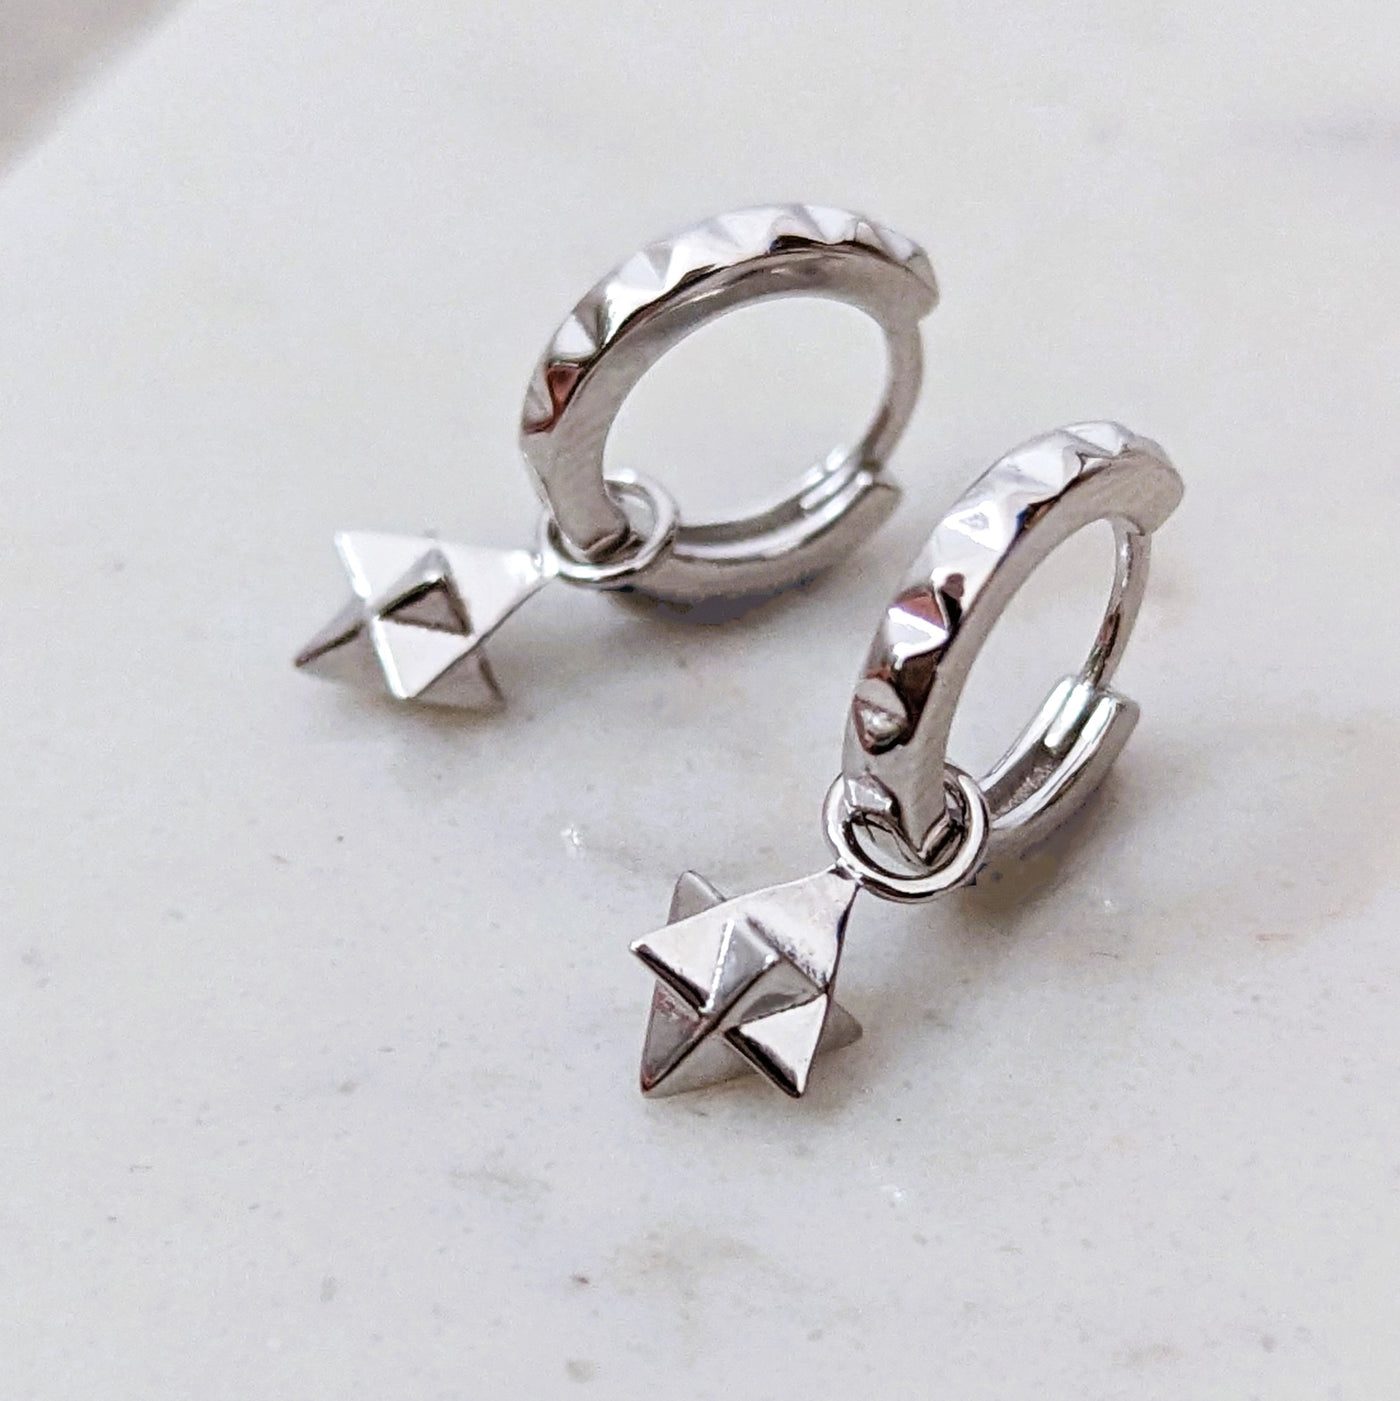 The Tetrahedron Accent Pyramid Hoop Earrings - Sterling Silver